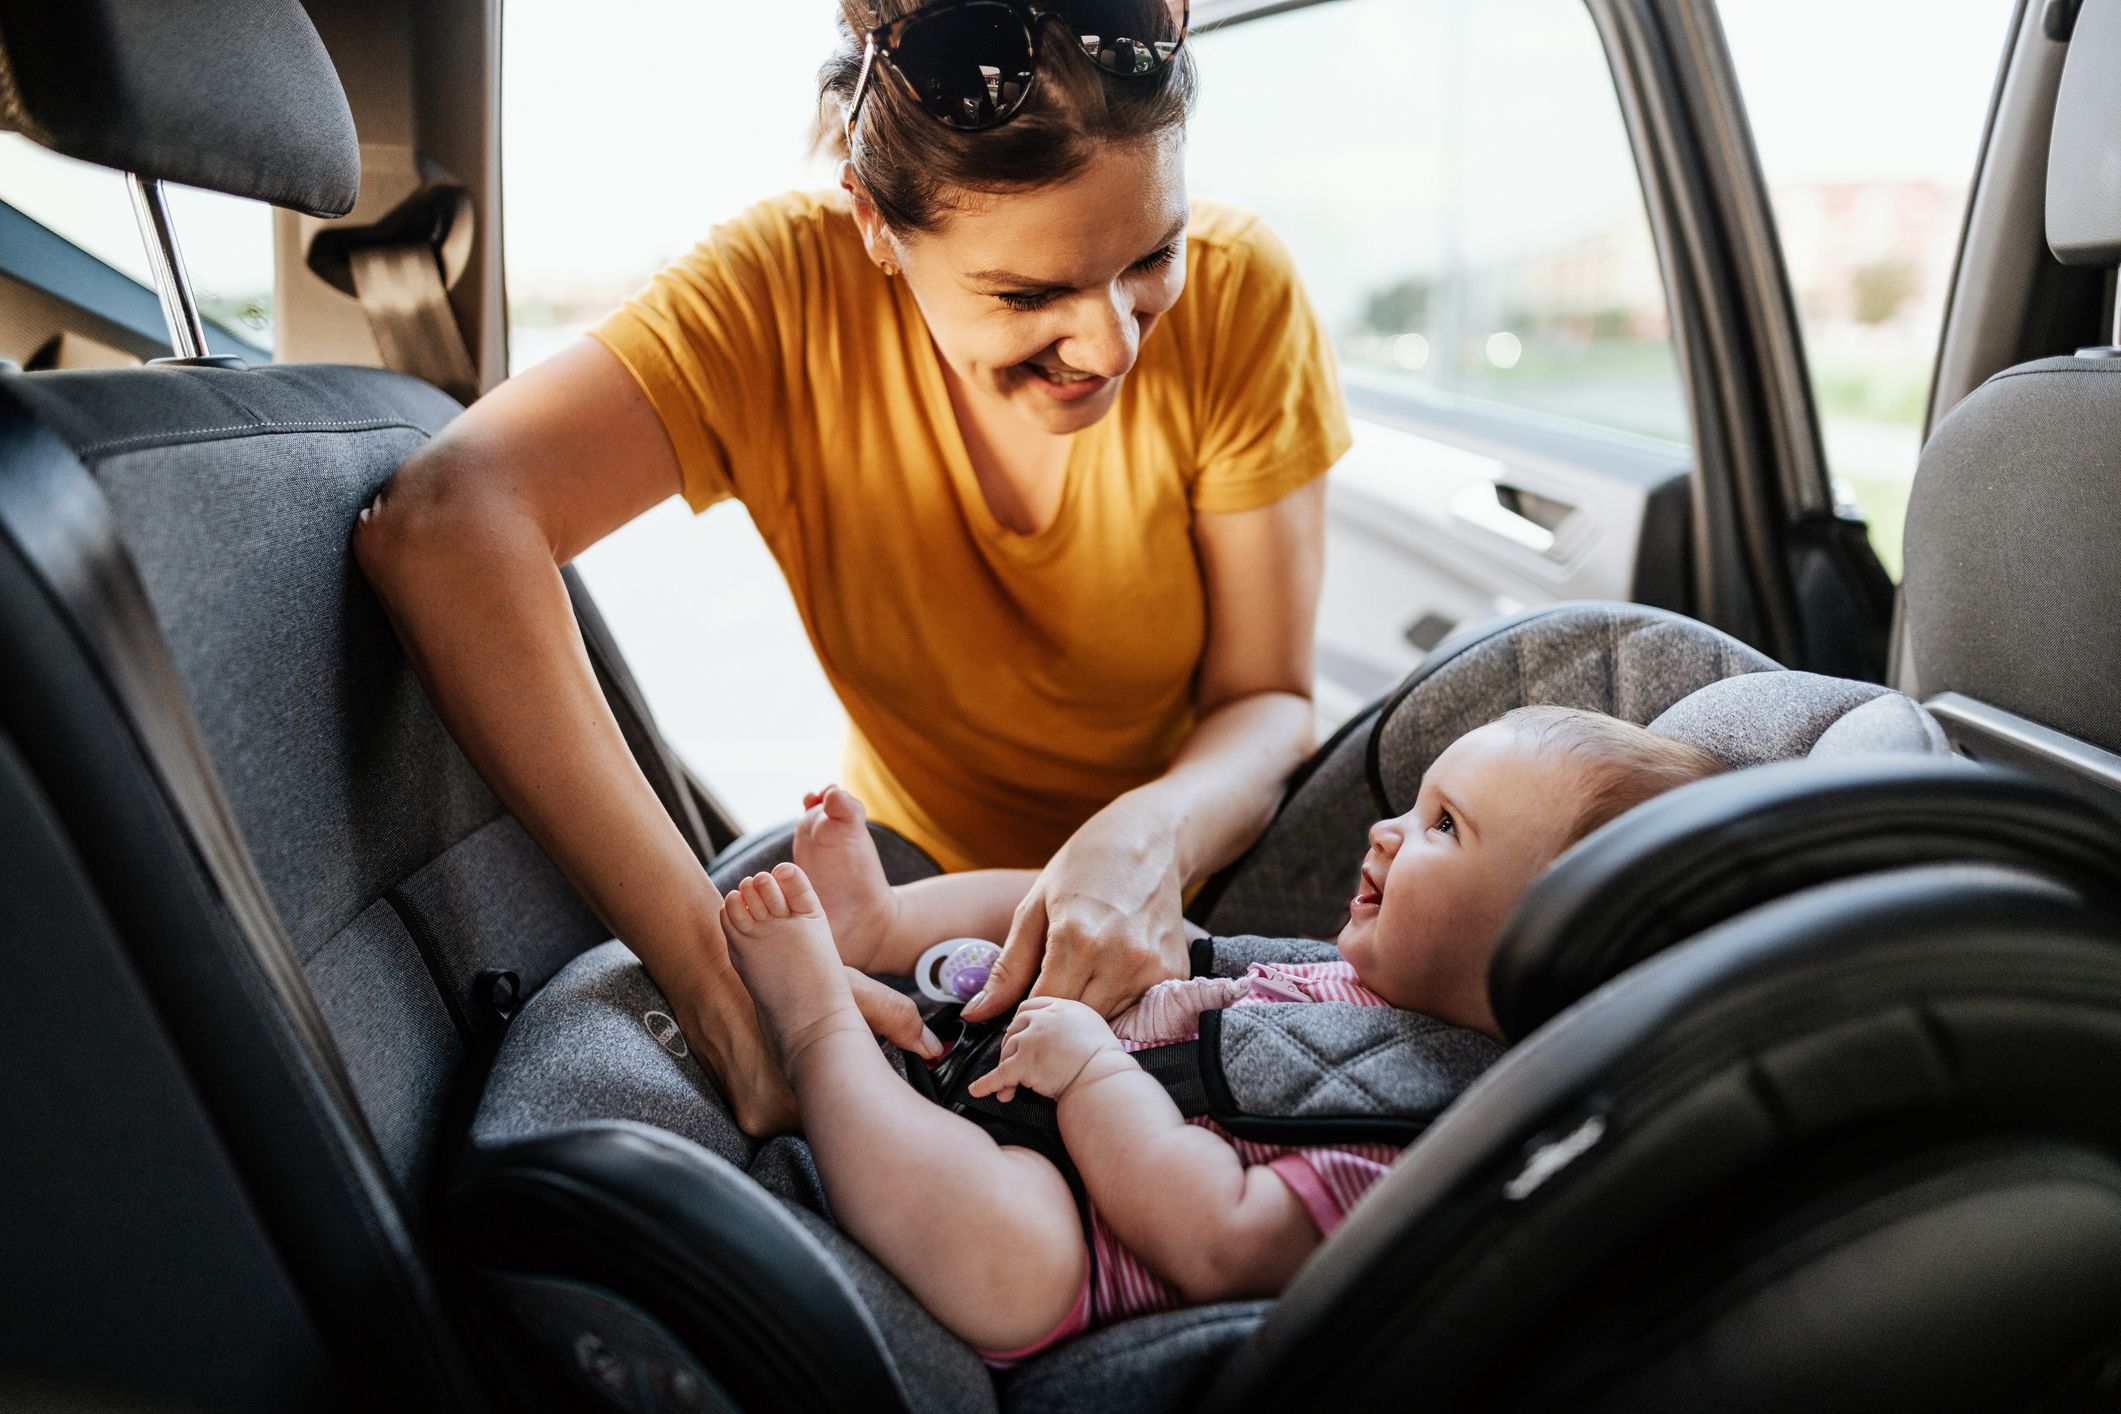 <p>Think about what you might need at your destination: bassinet, Pack ‘n Play, etc. You may be able to call to request larger items at your hotel or rental, attached to your reservation. If you plan on <a href="https://www.sofi.com/learn/content/do-you-need-credit-card-to-rent-car/">renting a car</a>, make sure you reserve a car seat.</p><p>If you don’t already have a baby-wearing sling or pack that’s light and comfortable, consider investing in one. The structured Ergobaby and Tula are two excellent options. If you’re not a baby-wearing type and your baby is old enough to sit up, think about getting a lightweight folding stroller (Maclaren has a range of great options) that’s easy to carry and maneuver (and should meet all carry-on specifications). Leave your souped-up fancy version at home.</p>